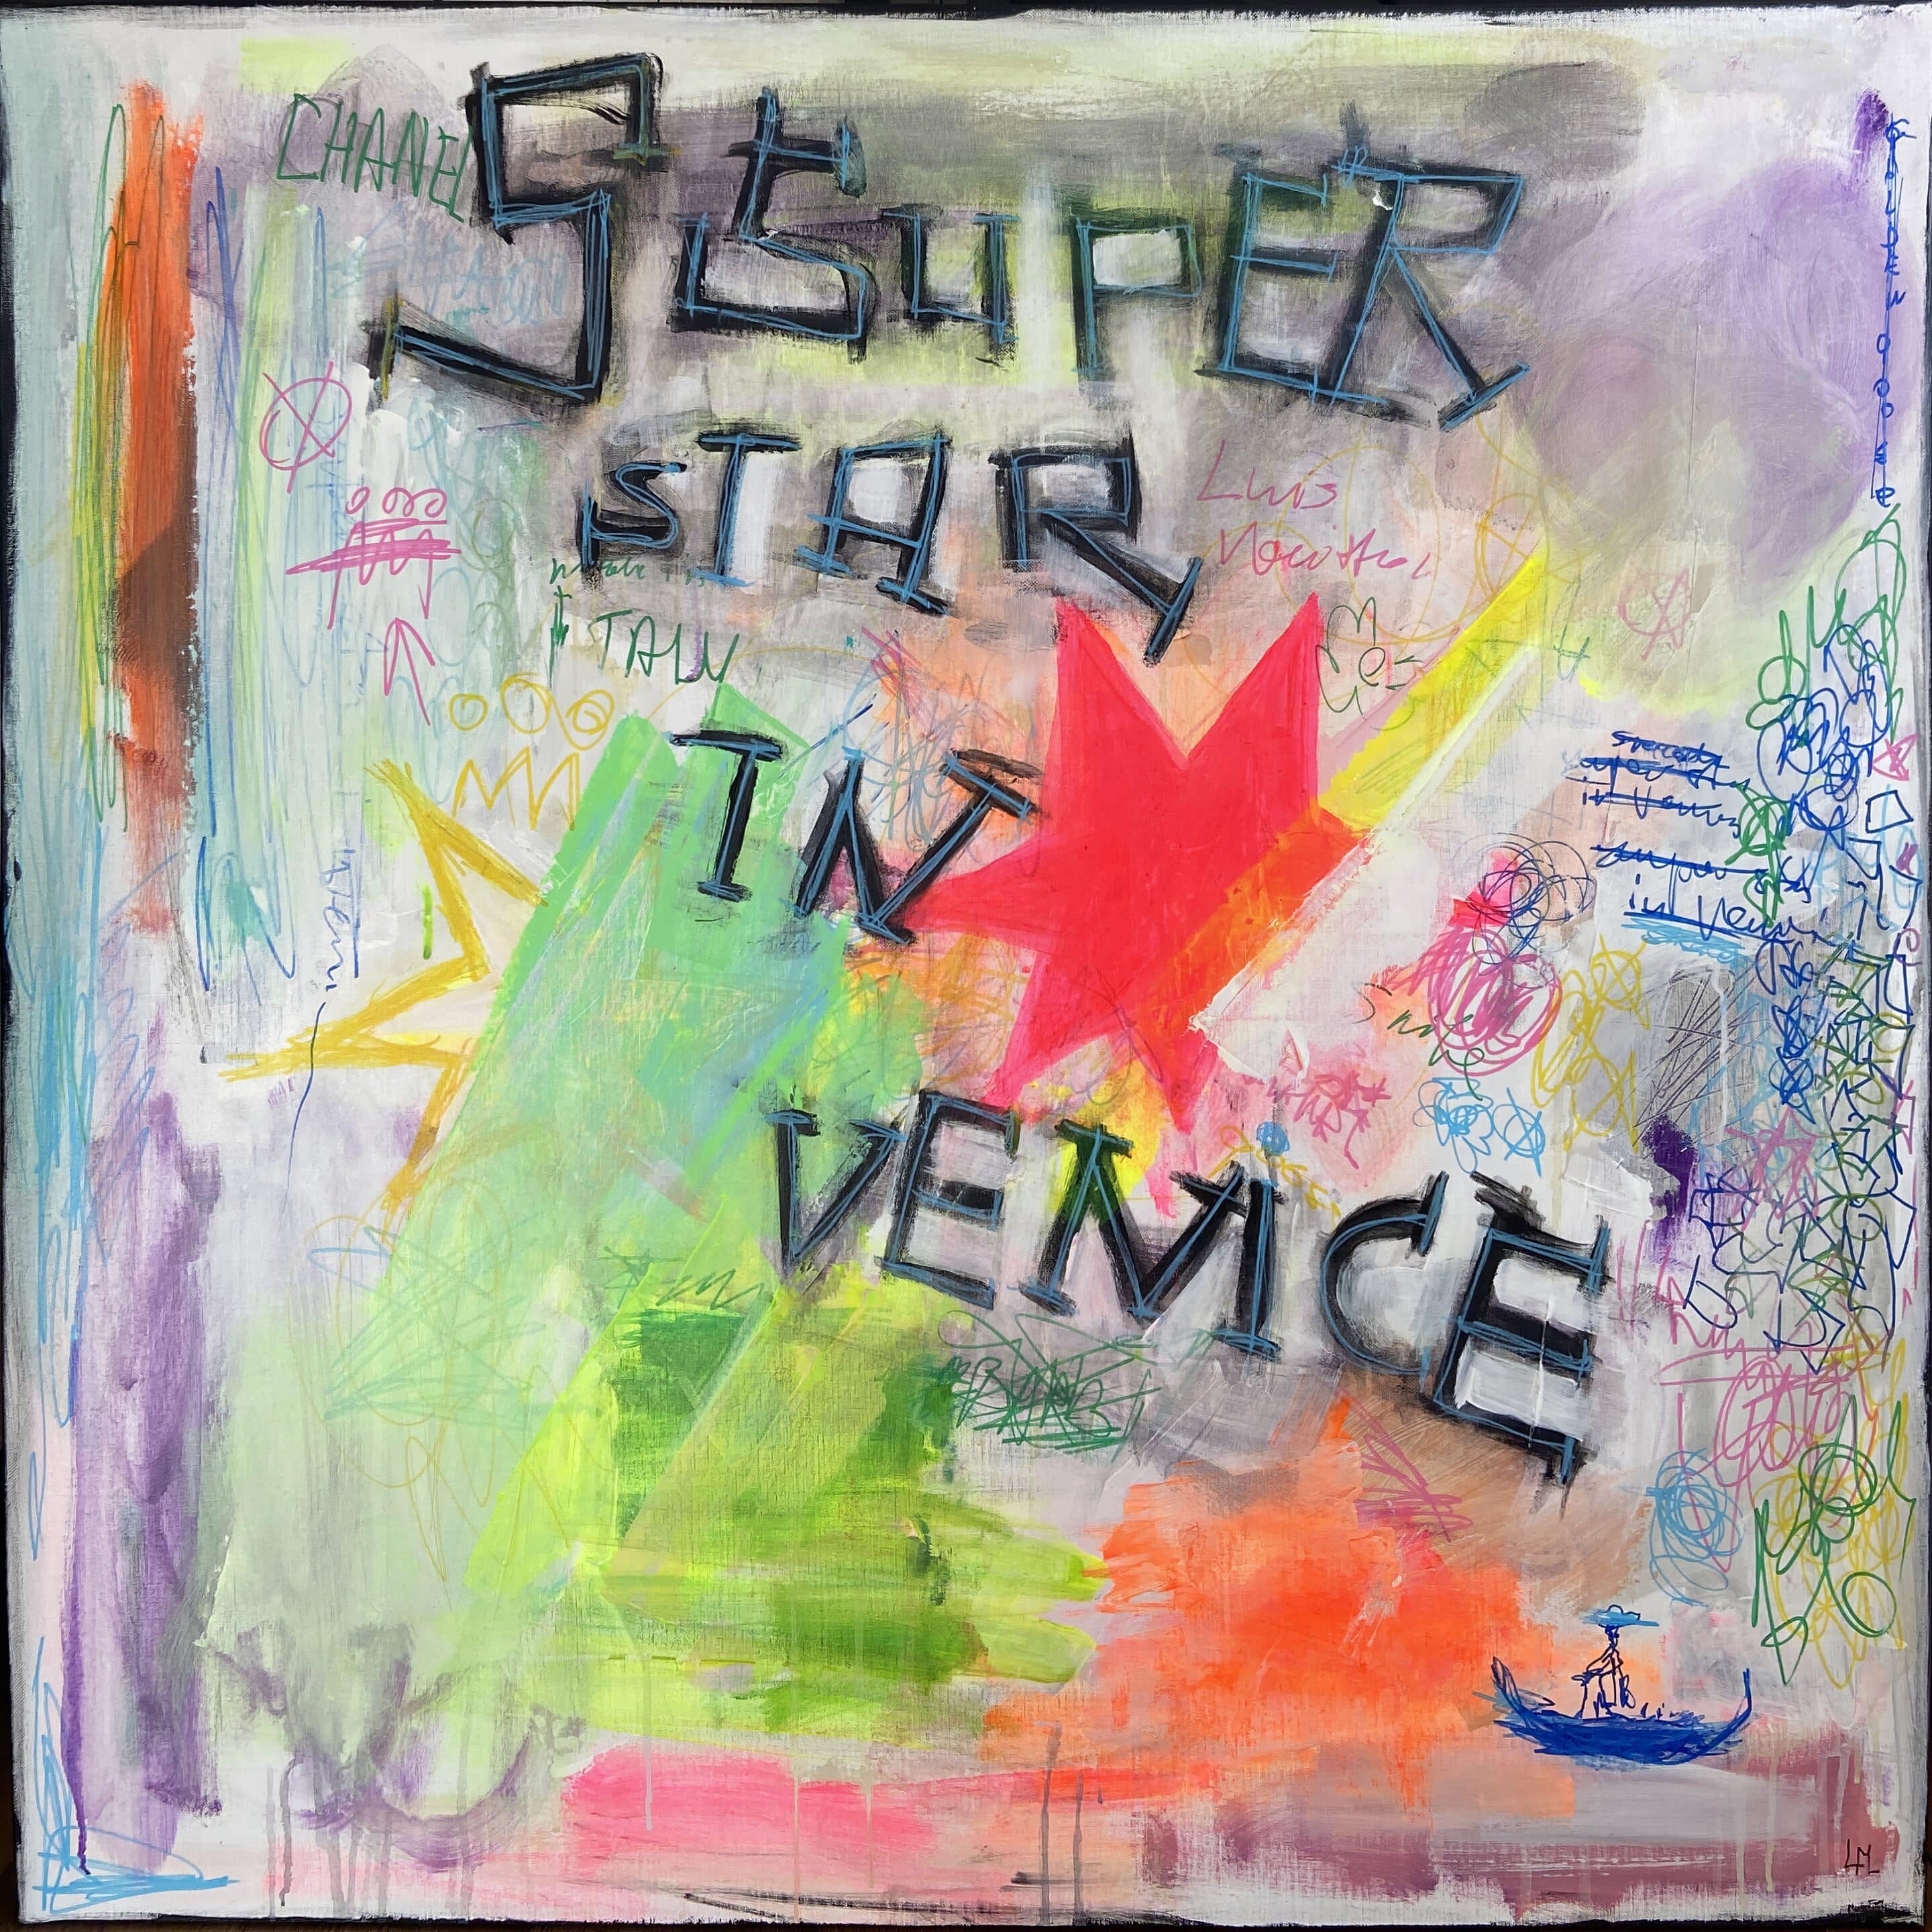 Super star - acrylic painting on canvas - 100 cm x 100 cm - Marzena Lavrilleux - artist painter in Orleans - France